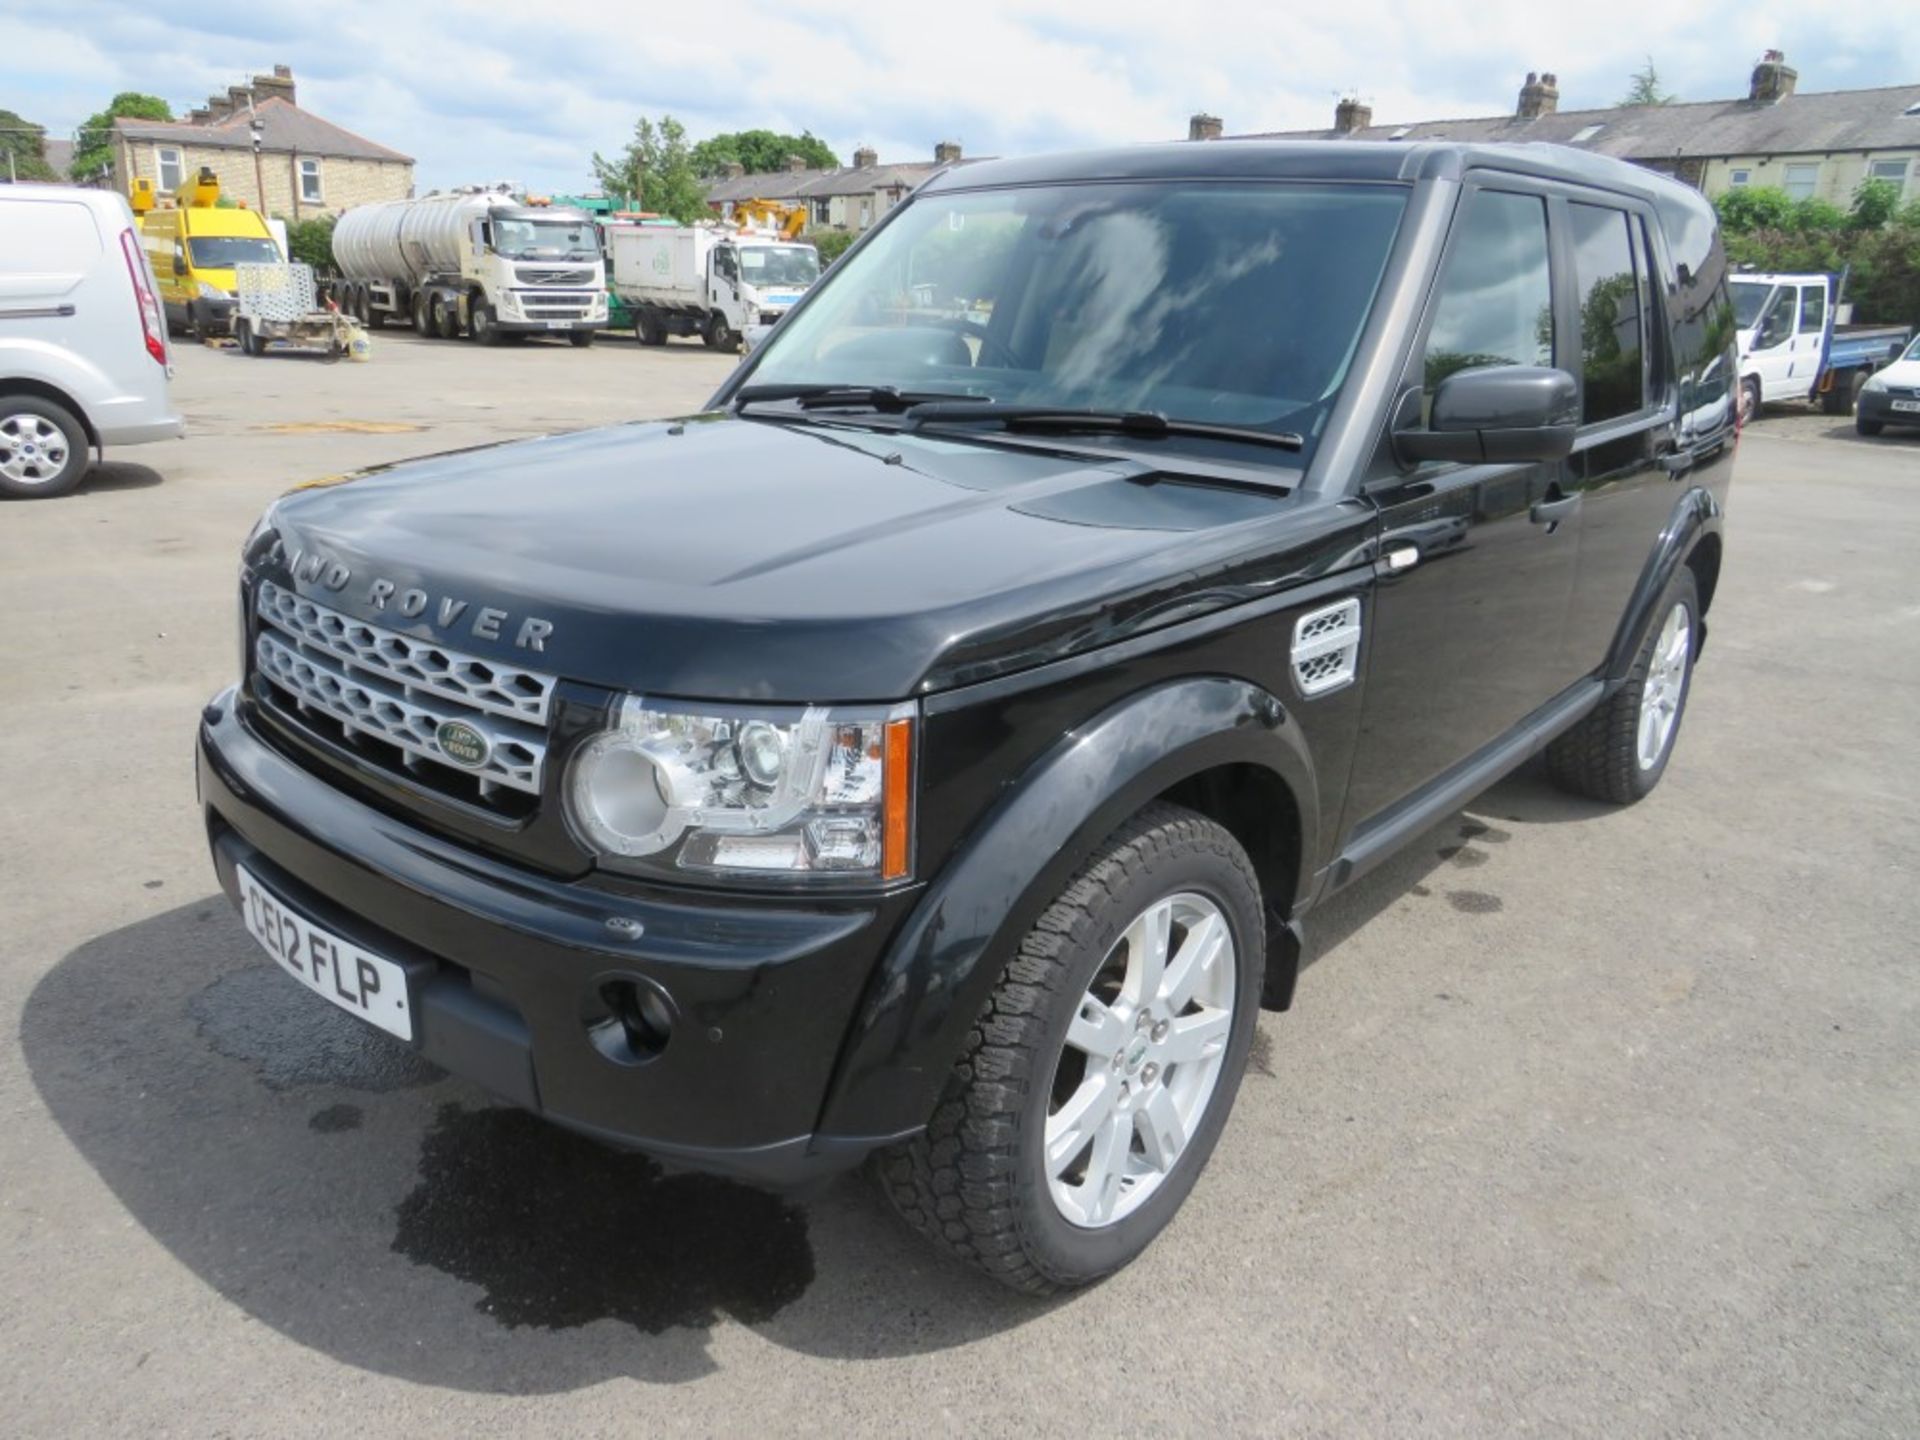 12 reg LAND ROVER DISCOVERY SDV6 AUTO 255 - Â£4000 SEAT CONVERSION IN BACK, 1ST REG 03/12, TEST 01/ - Image 2 of 7